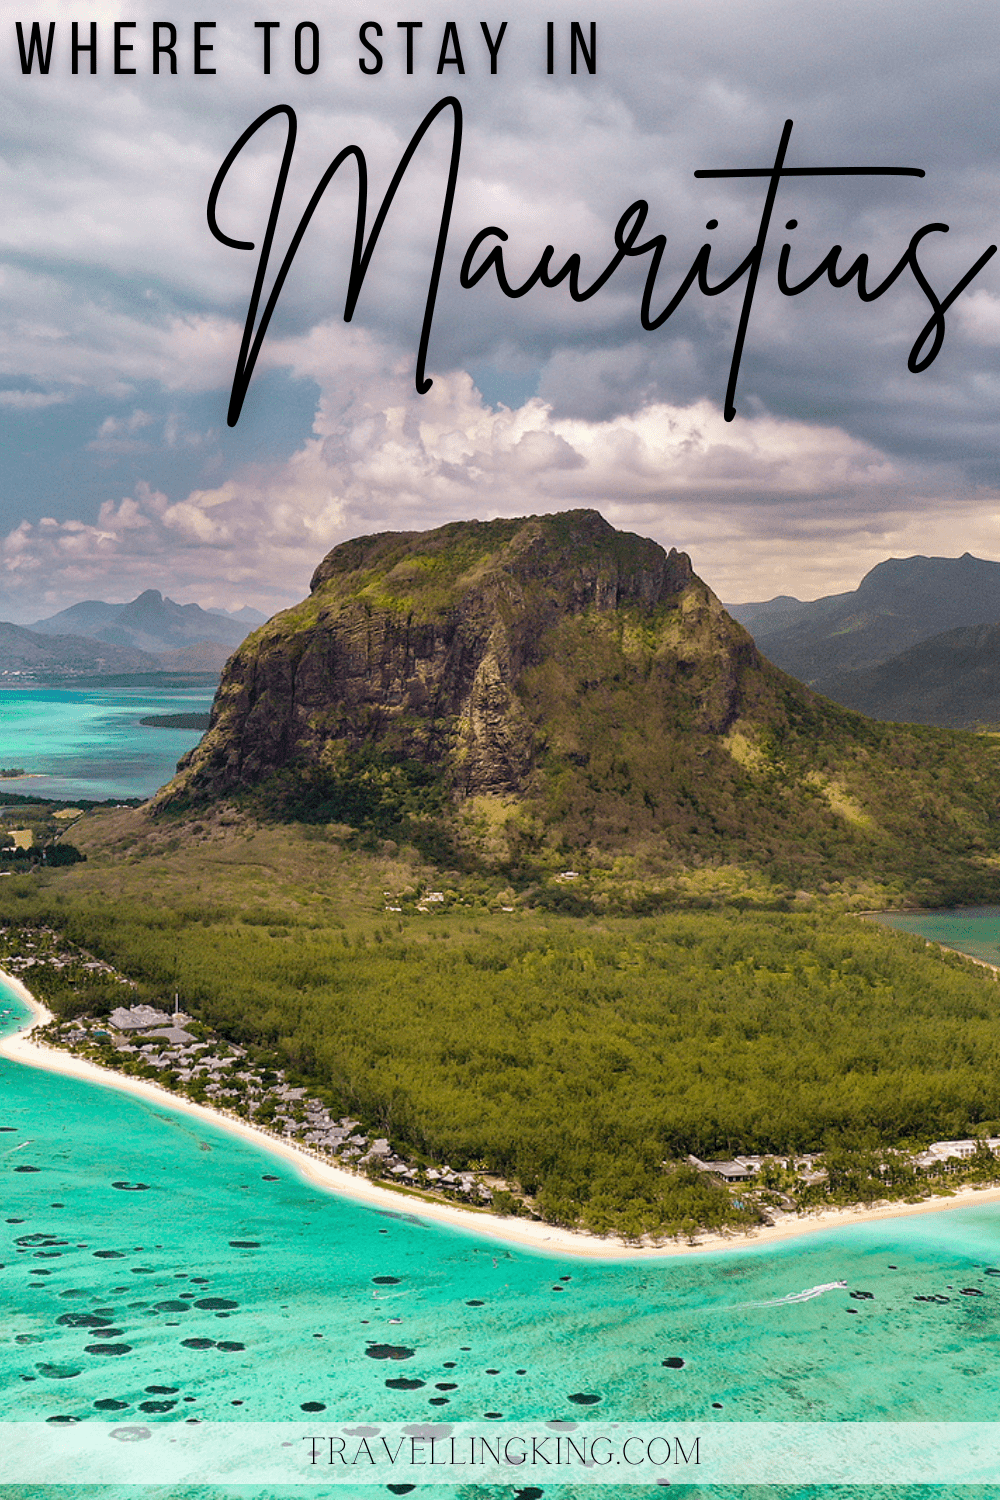 Where to stay in Mauritius